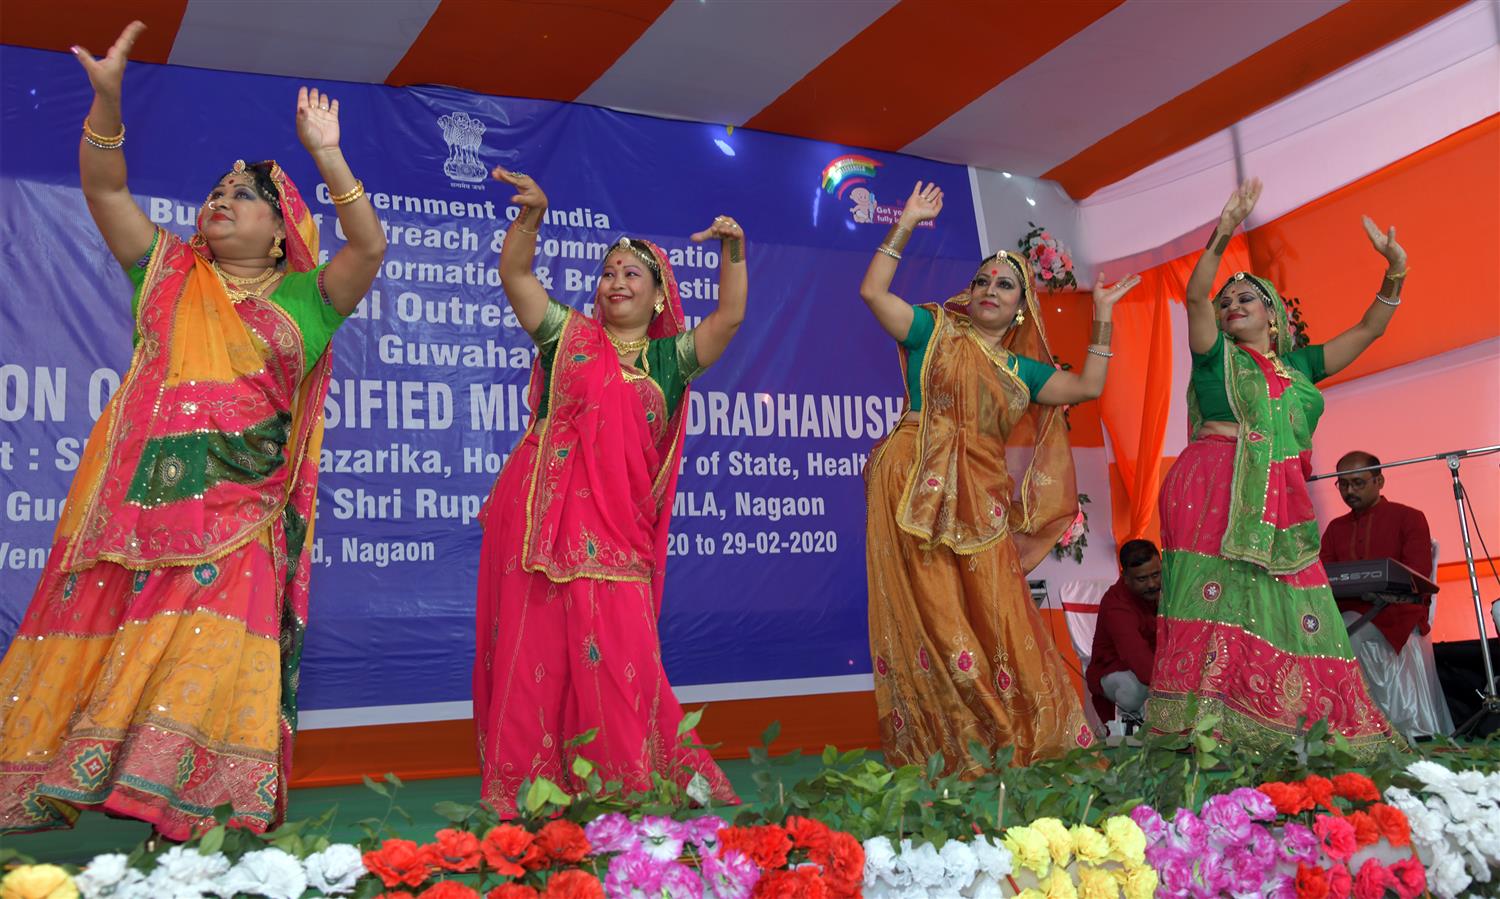   Artists  of the Regional Outreach Bureau, Guwahati under the Ministry of Information and Broadcasting presenting cultural programme at an exhibition on Intensified Mission Indradhanush 2.0 at Neherubali Play Ground at Nagaon on 29th February  2020.

